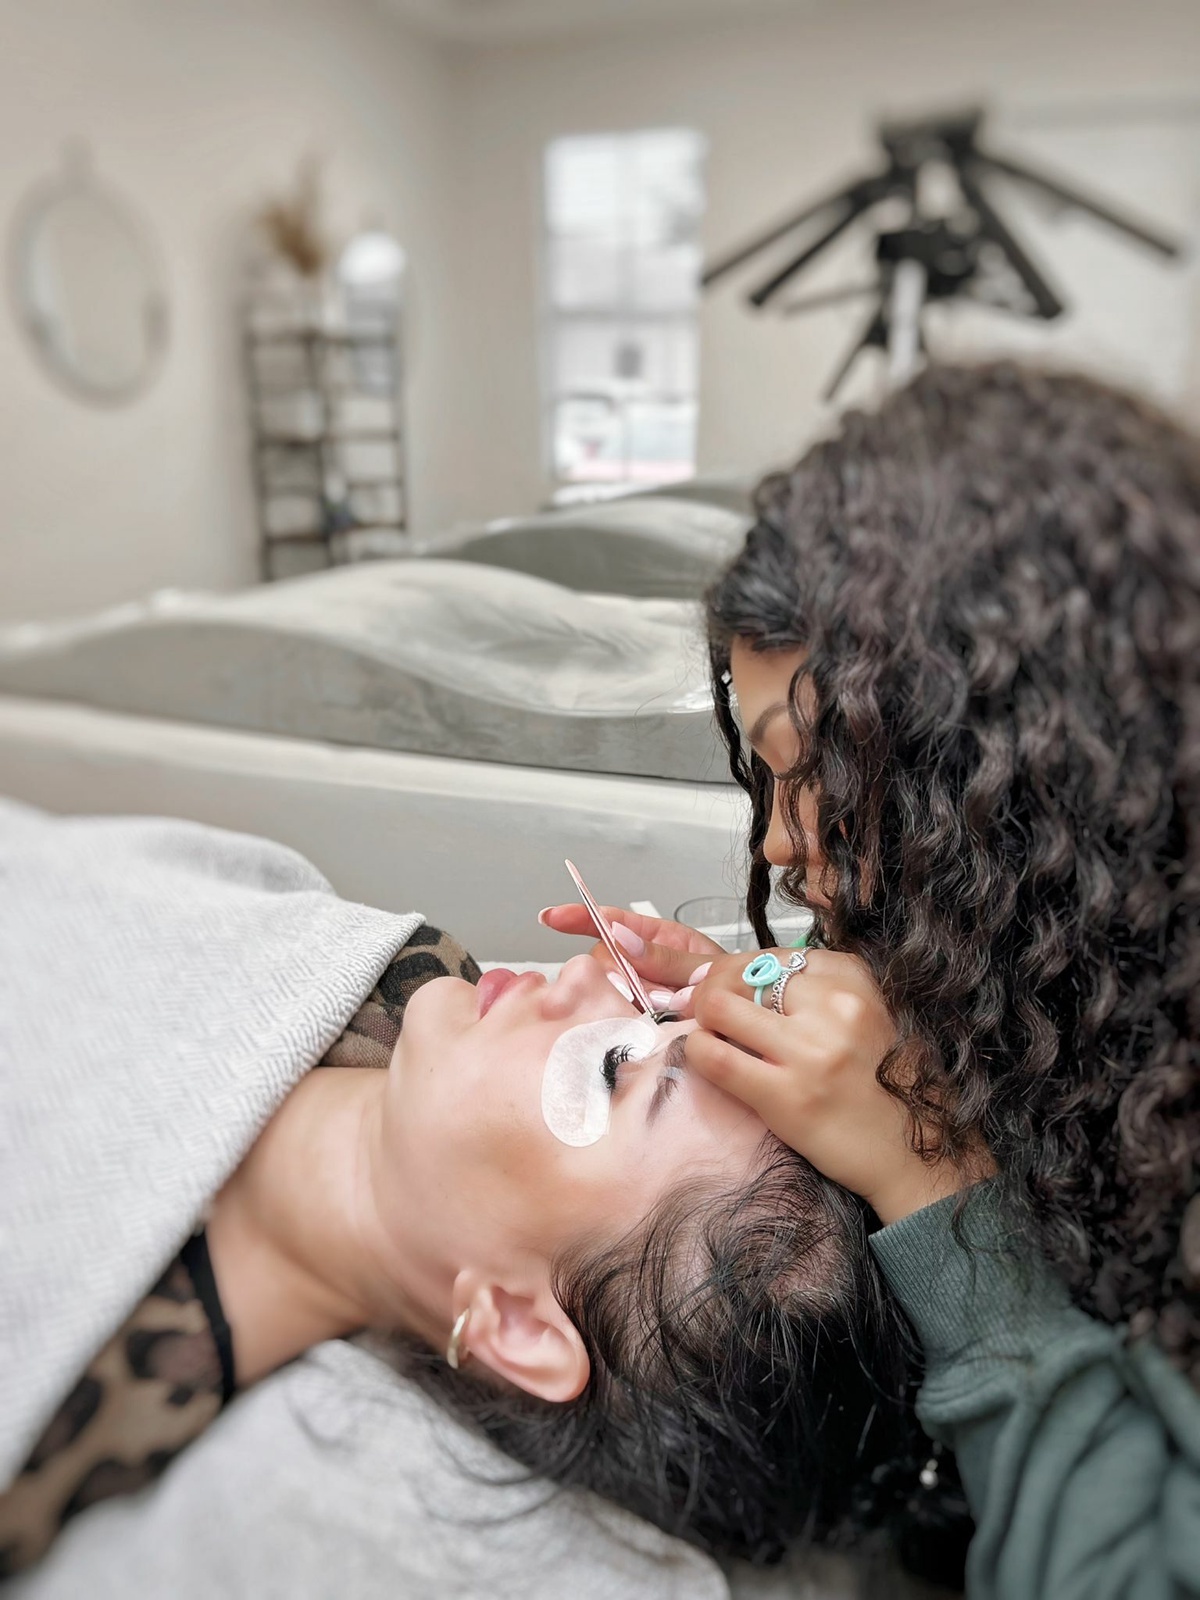 From Beginner to Pro: A Roadmap to Eyelash Extension Training